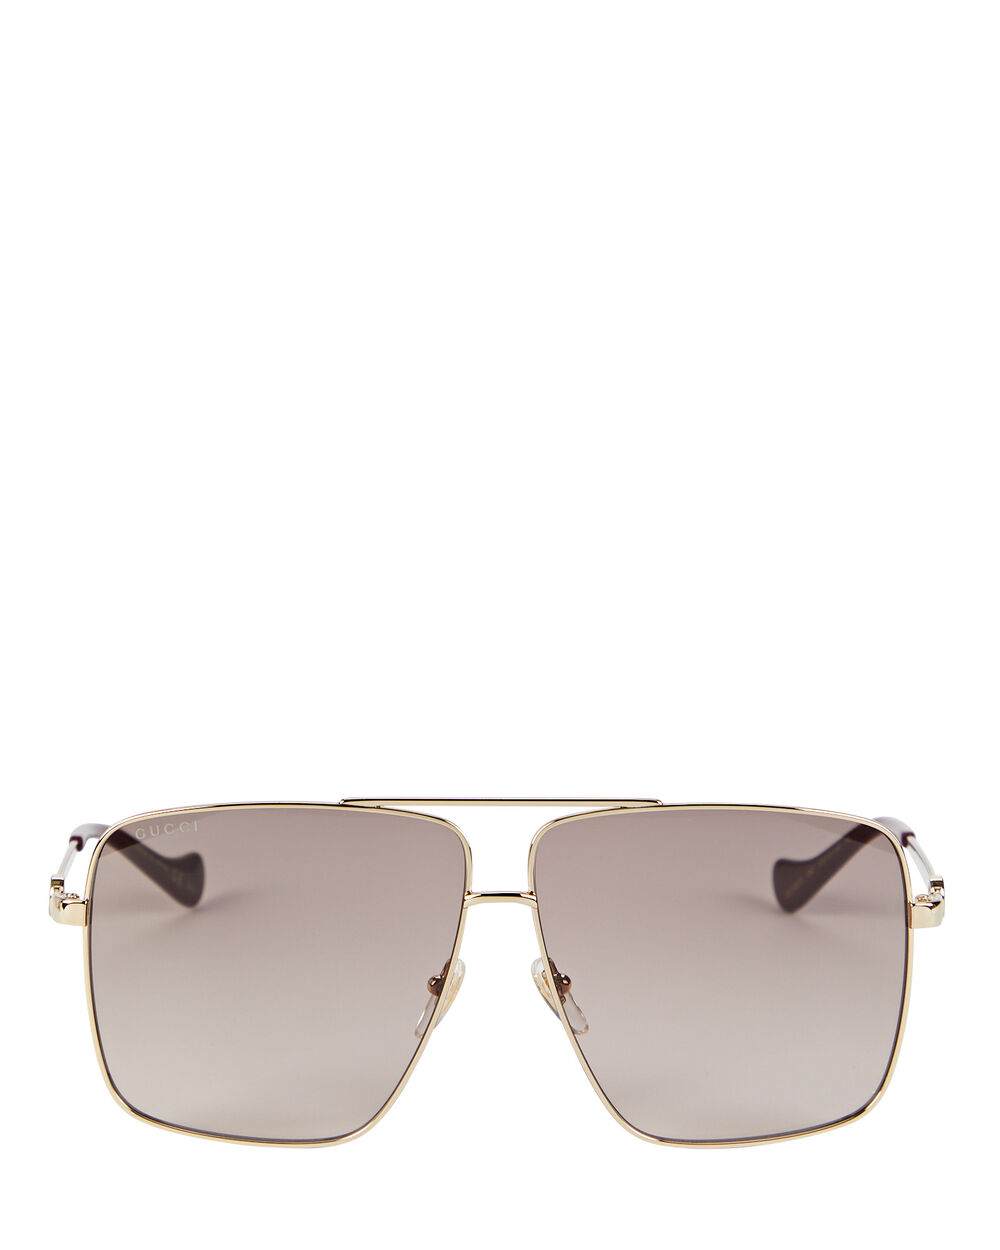 chanel square sunglasses with chain